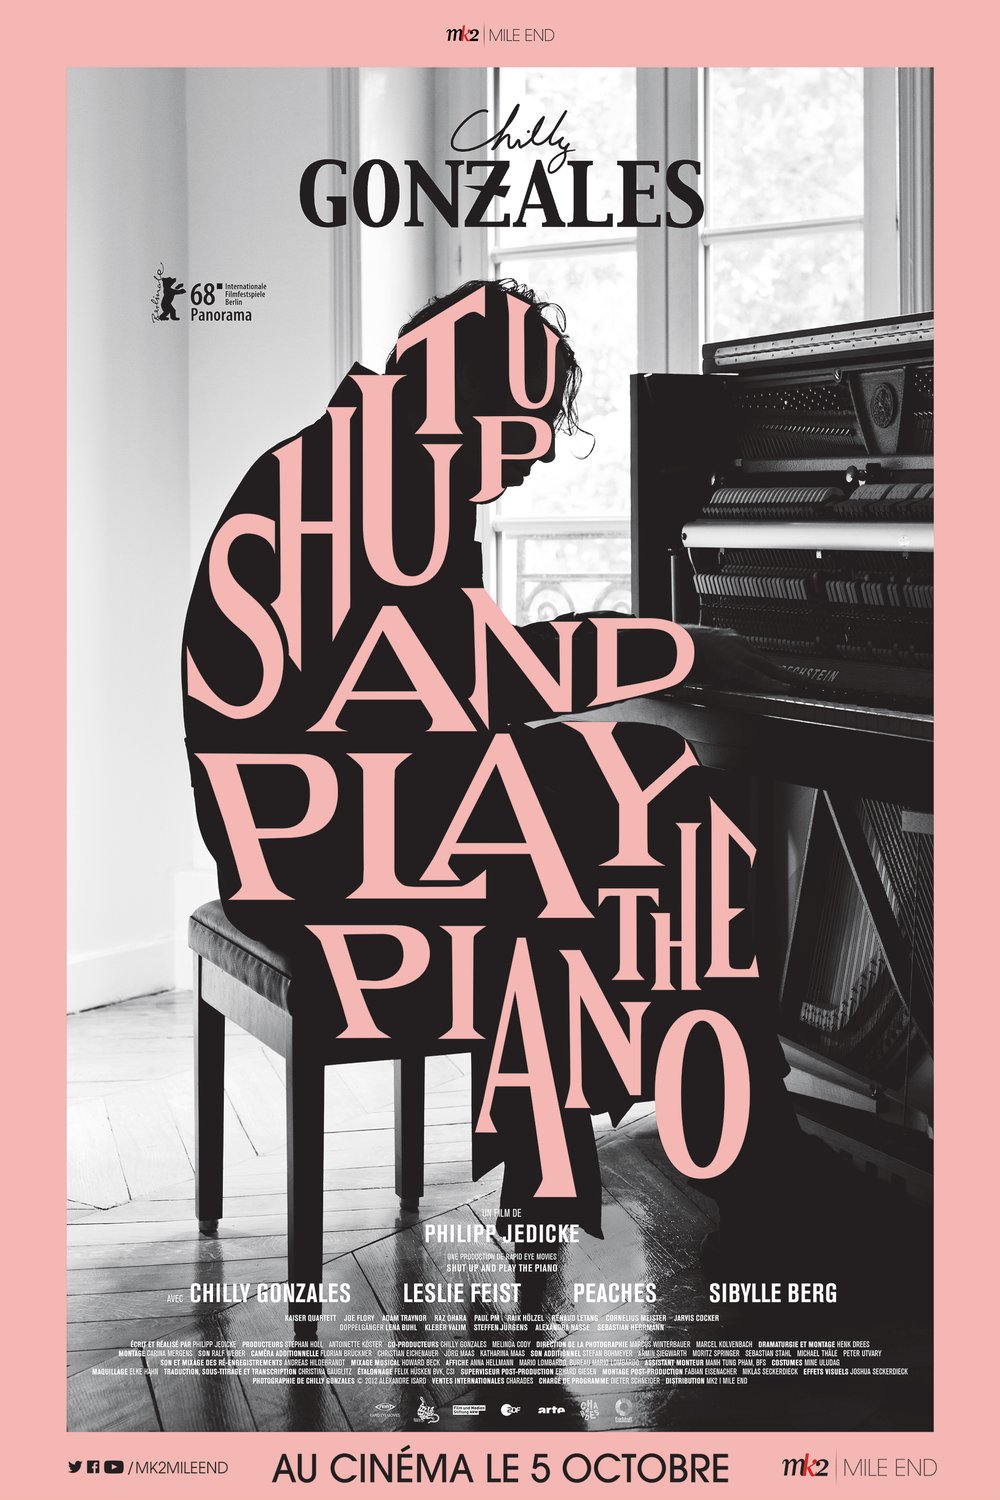 L'affiche du film Shut Up and Play the Piano v.f.